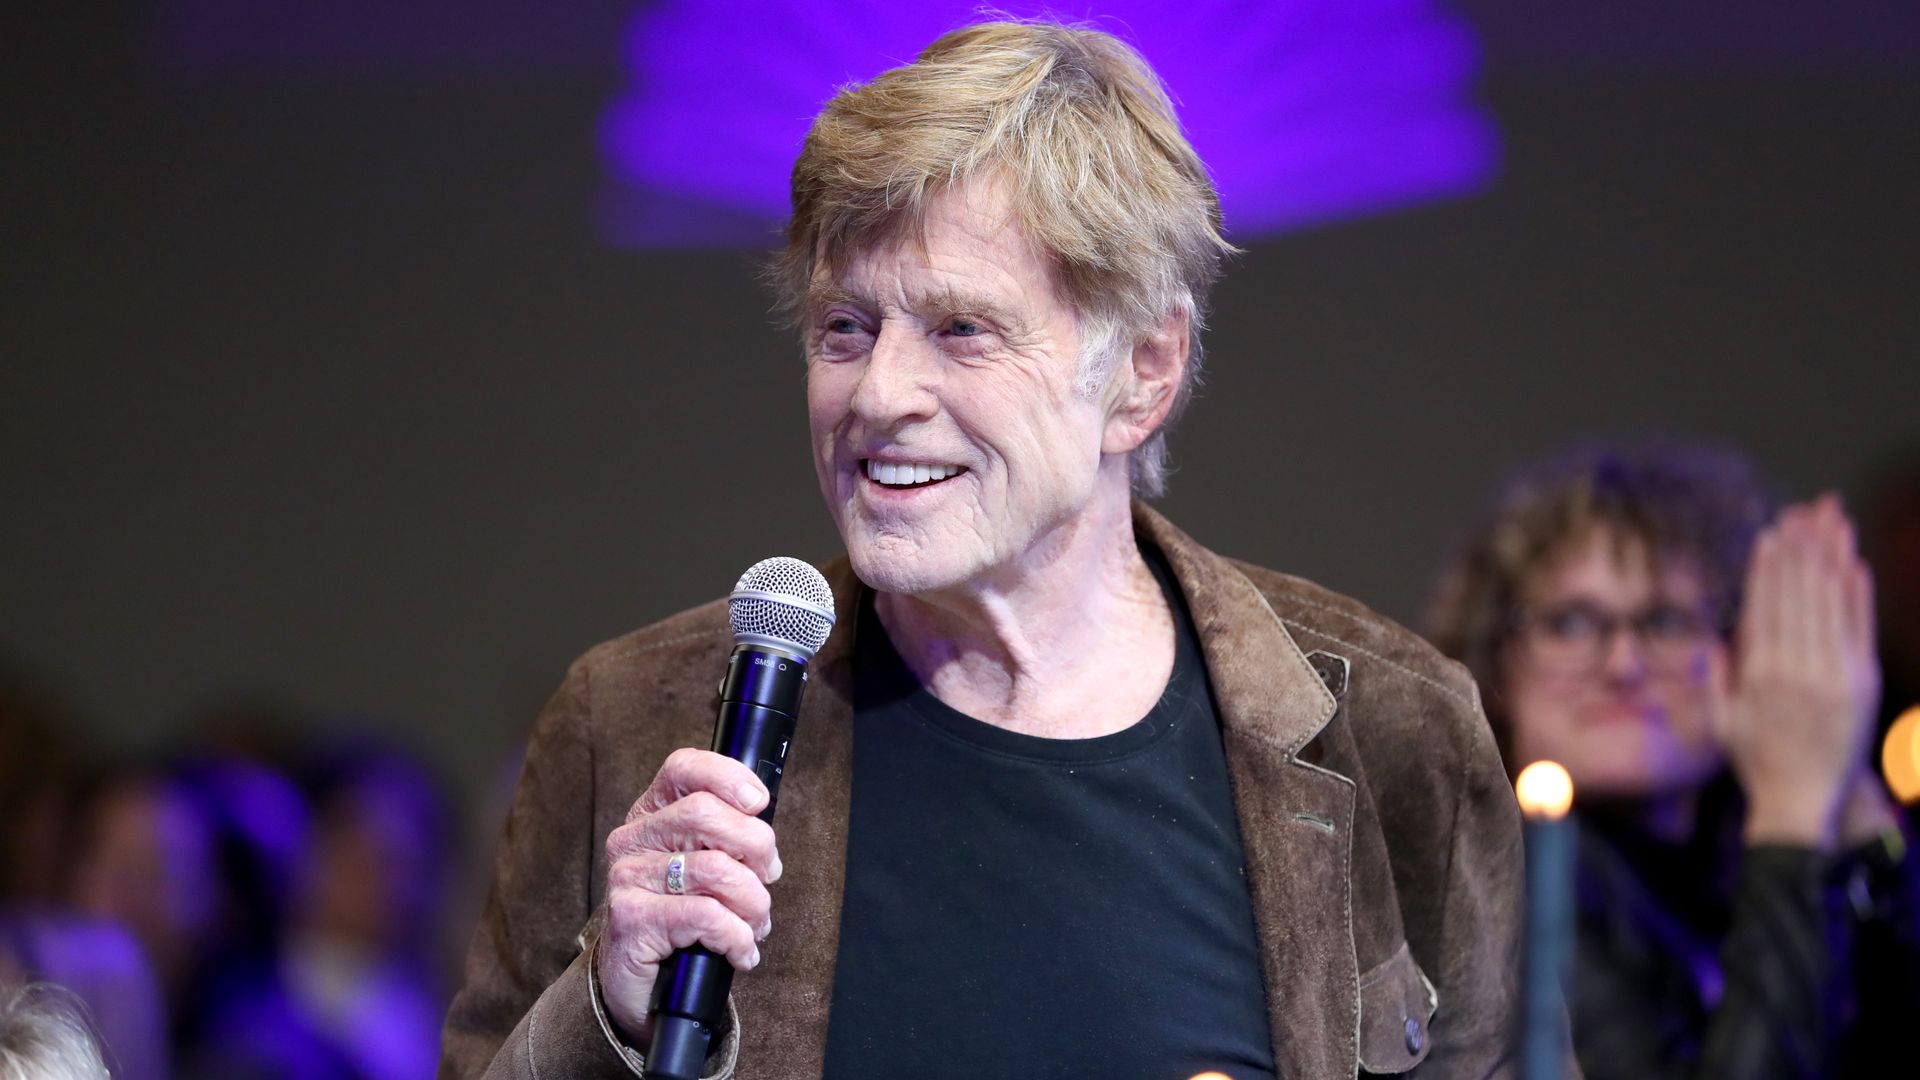 Robert Redford holding a mic and speaking to a crowd while smiling at Sundance Film Festival in 2020